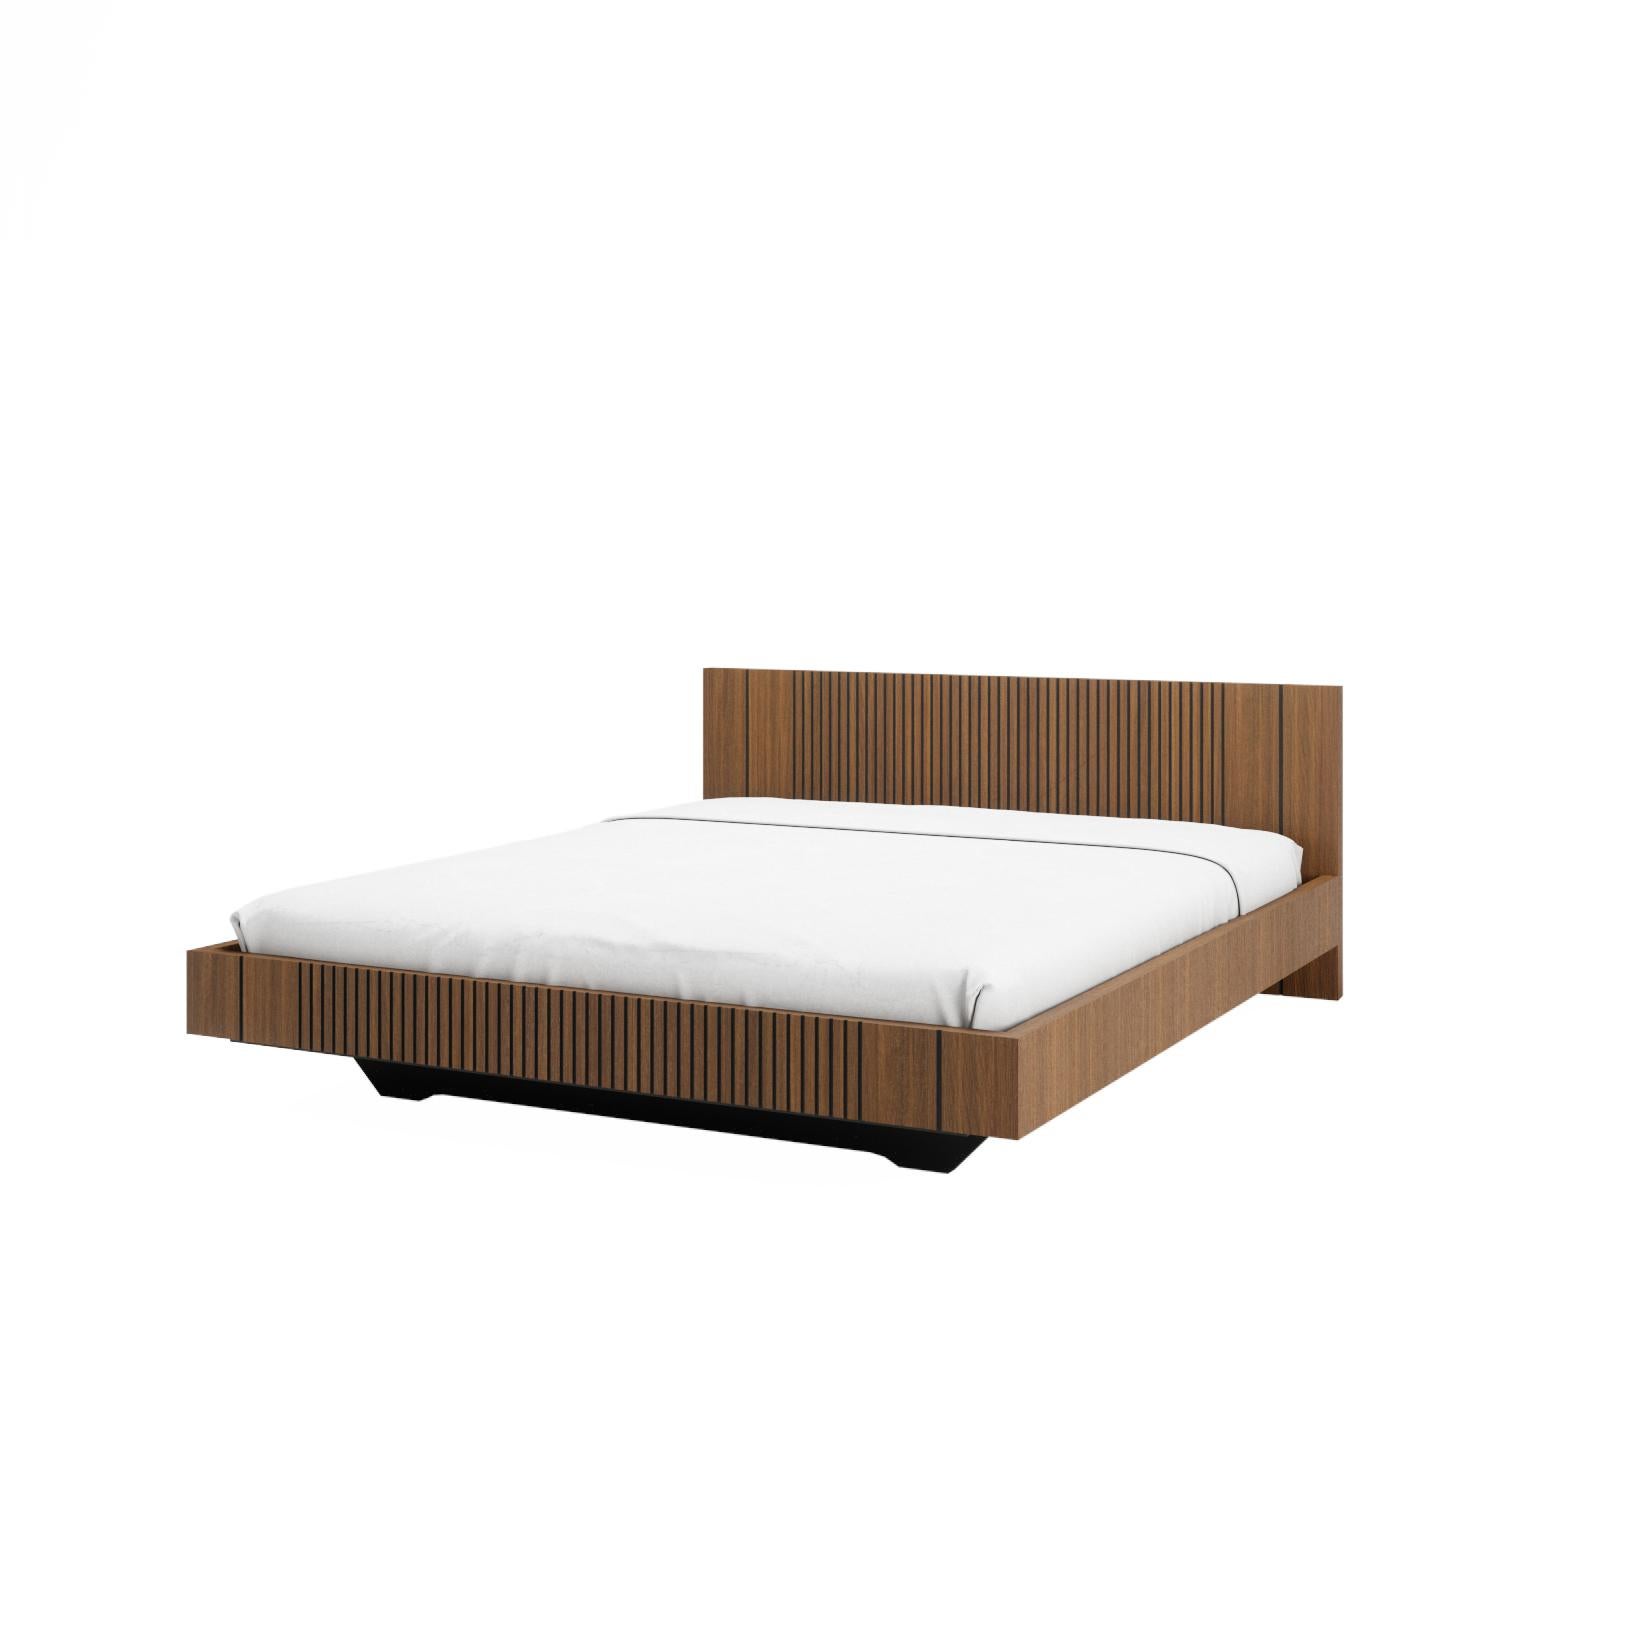 Portuguese Piana Simple Bed For Sale